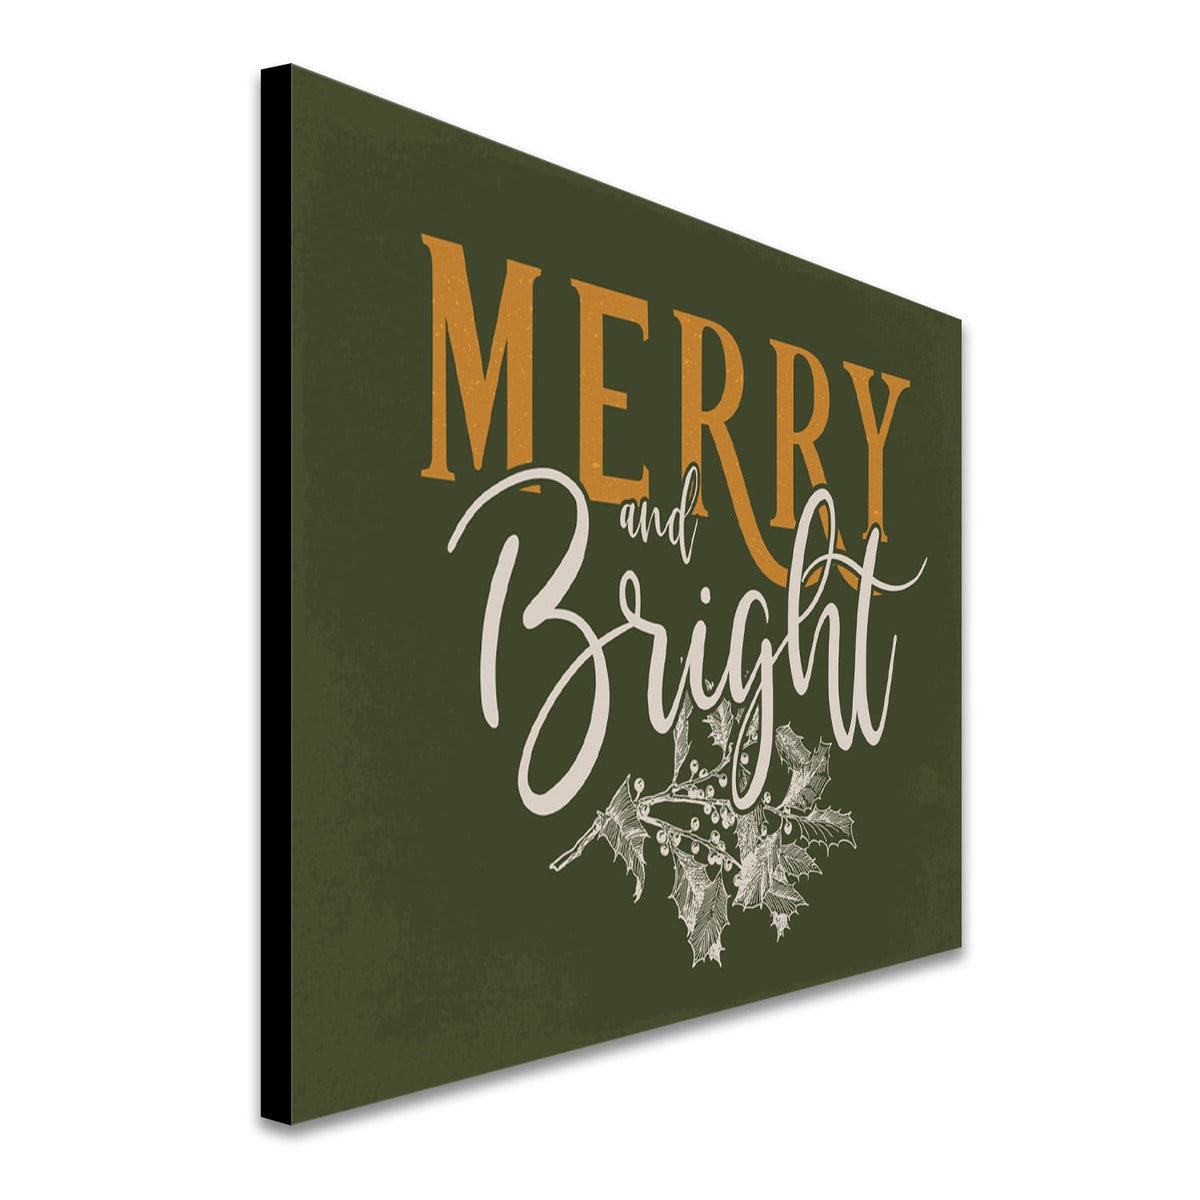 Merry and Bright sign from Personal Prints